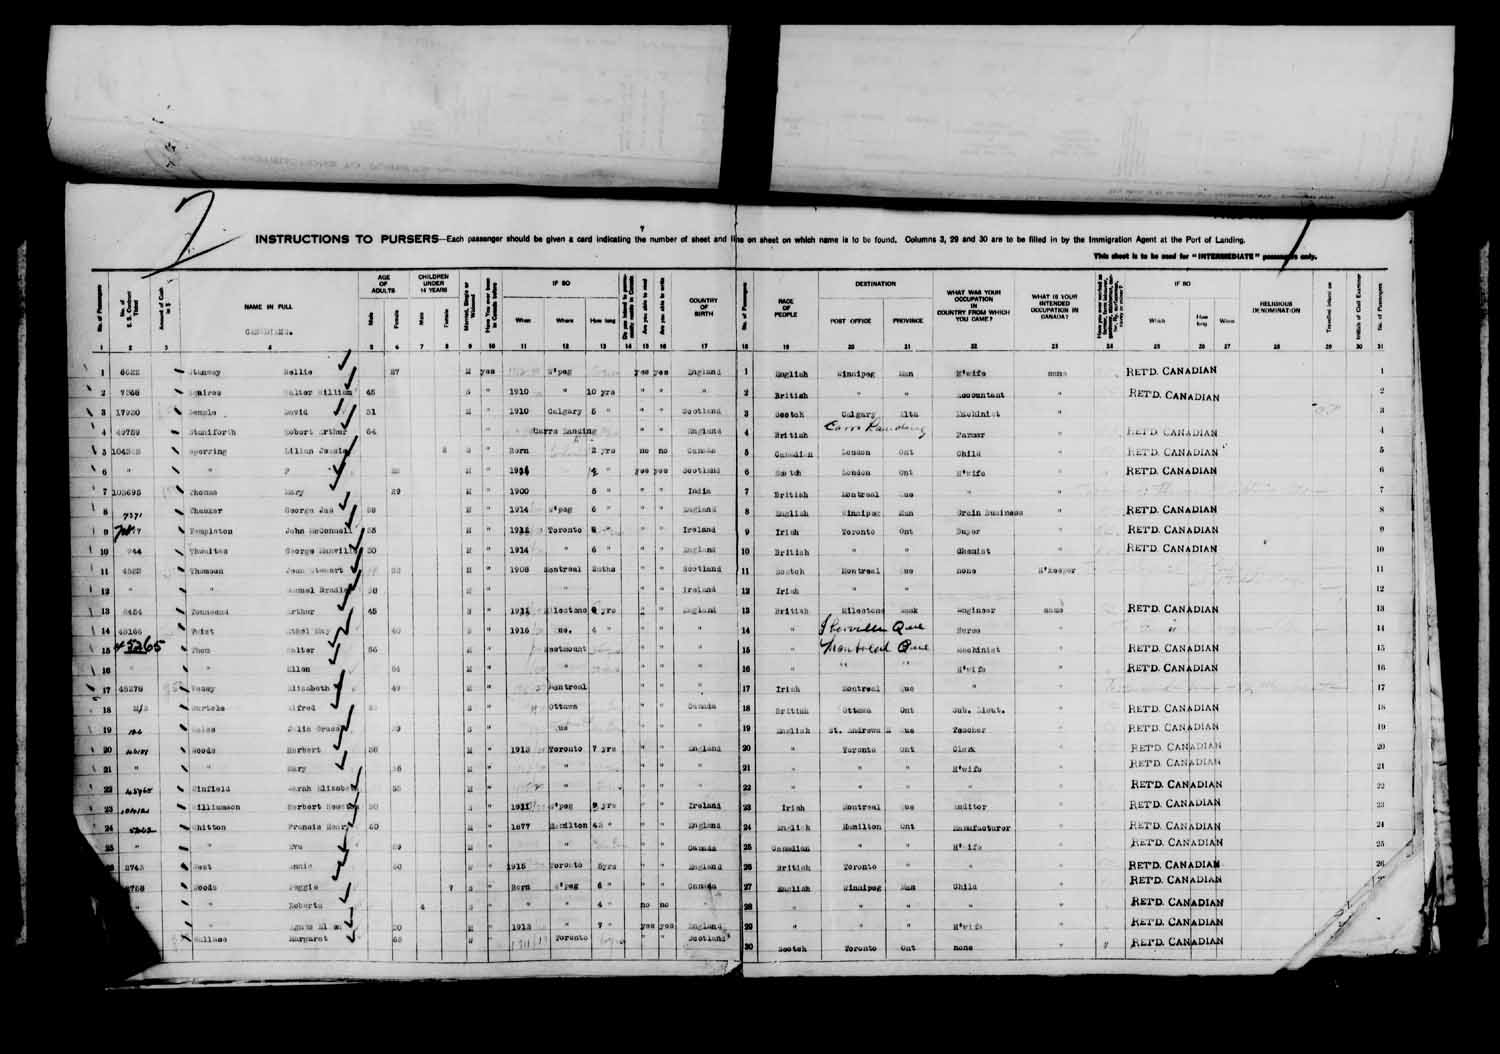 Digitized page of Passenger Lists for Image No.: e003610614